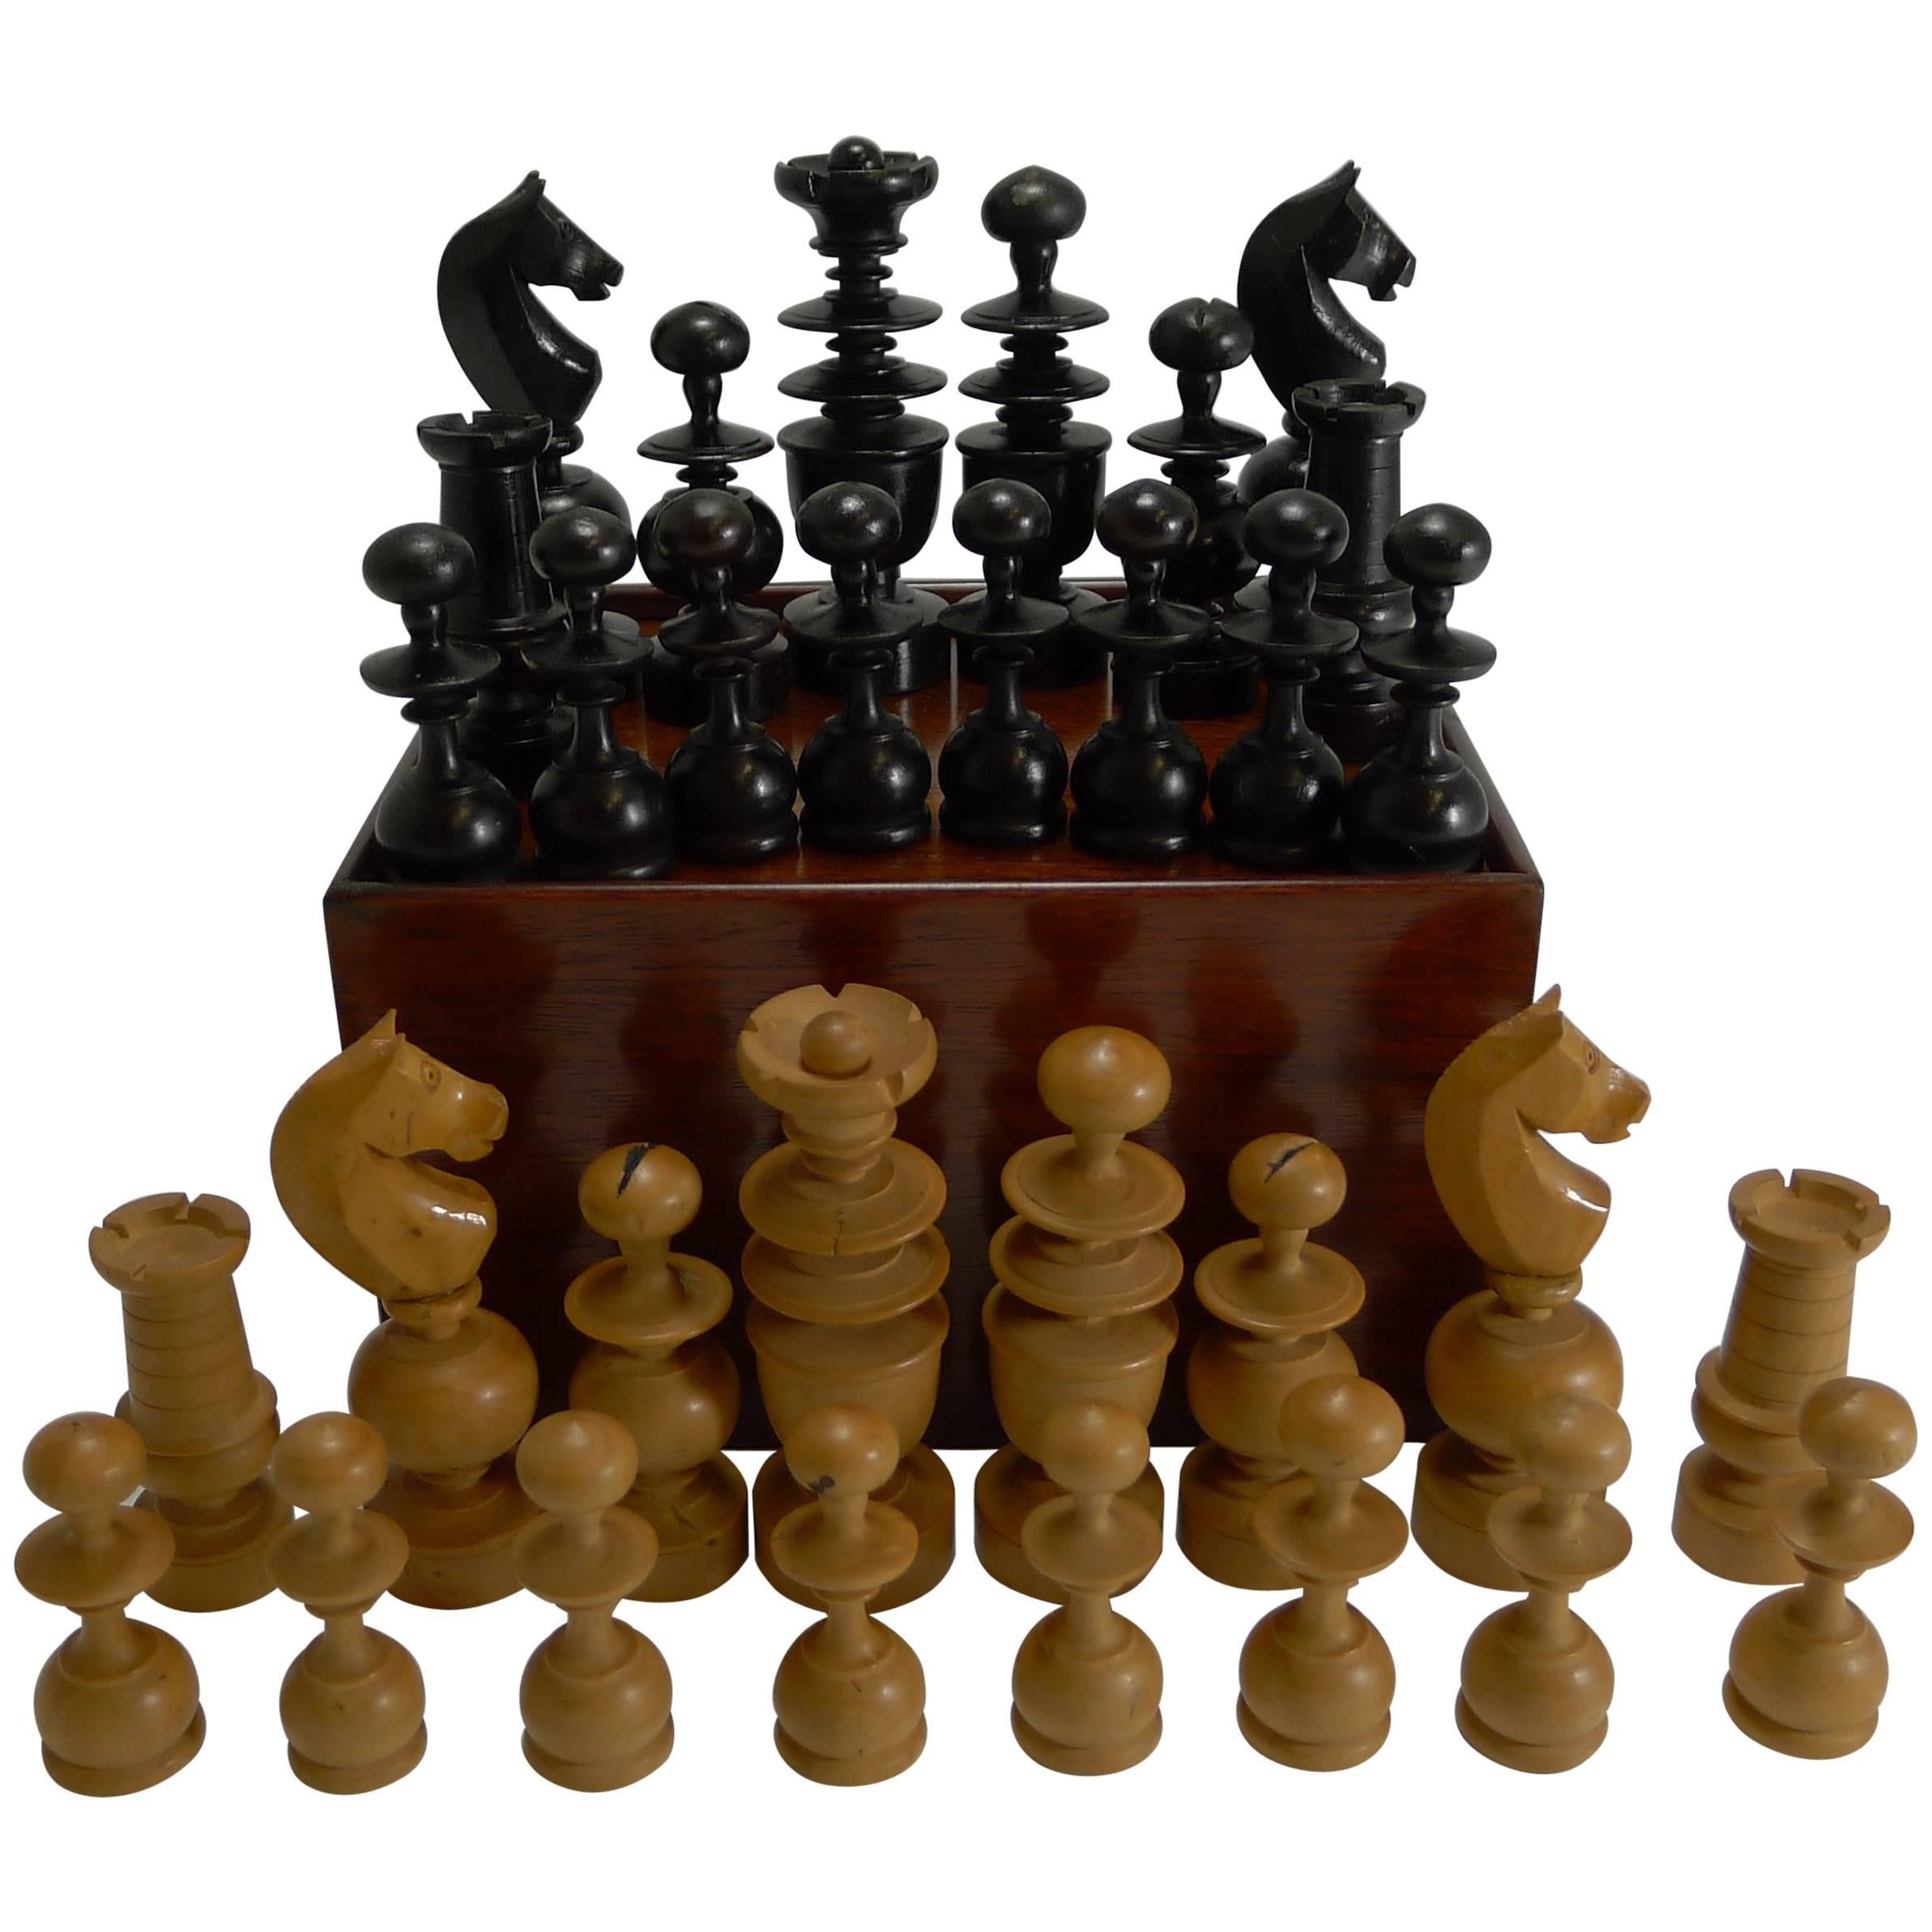 Large Antique English Regency Style Chess Set in Wooden Case, circa 1900